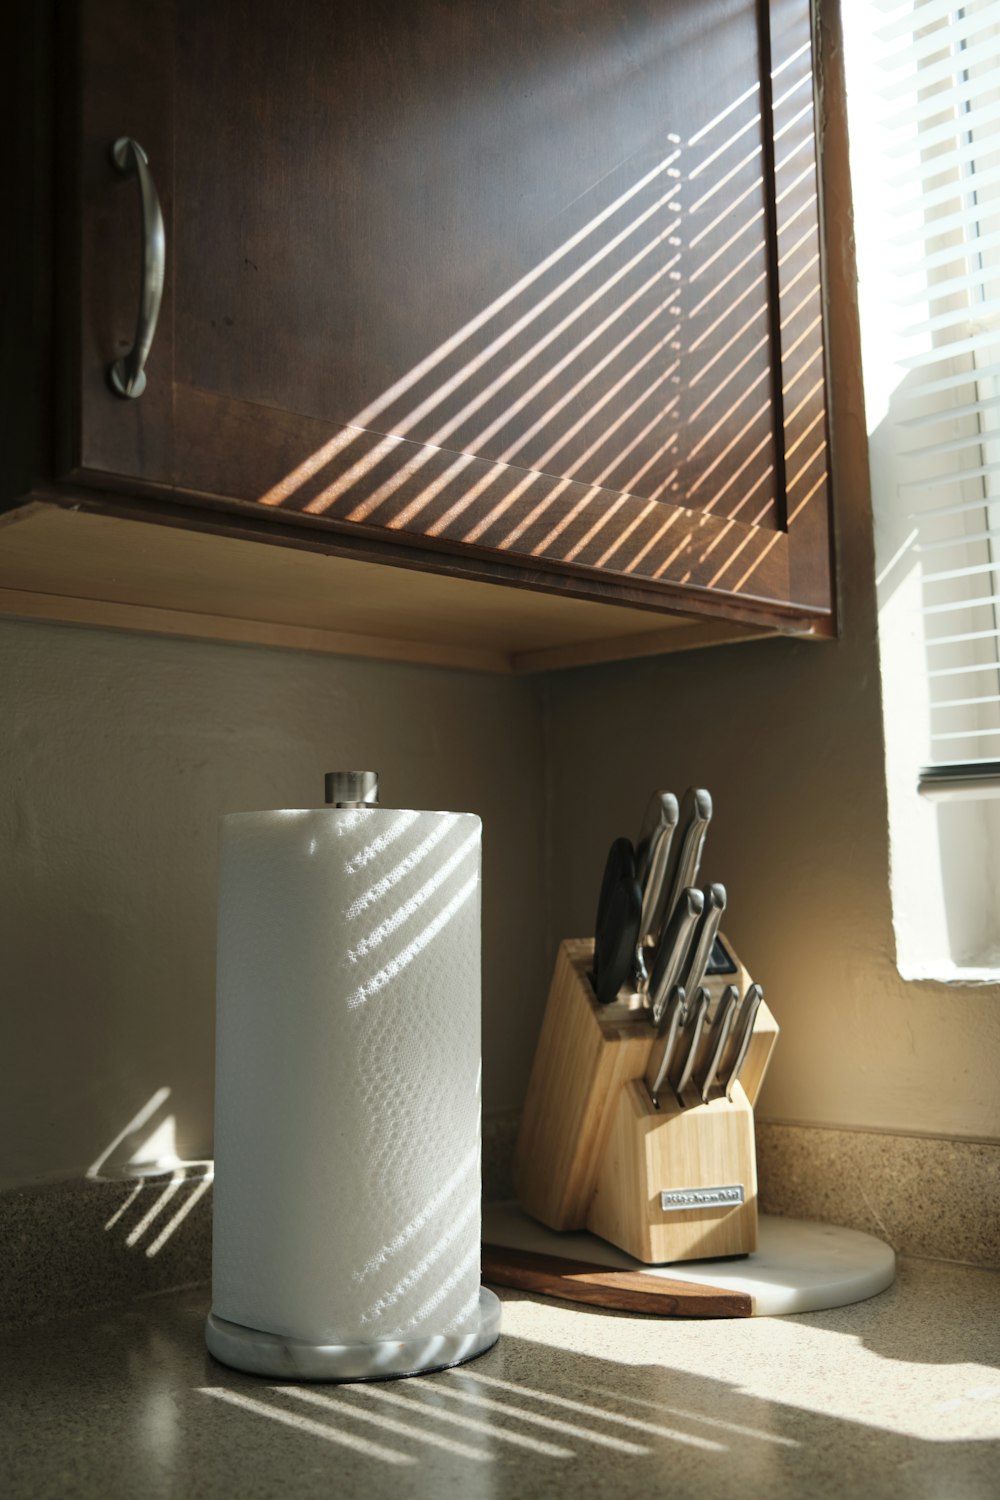 a kitchen counter with a cutting board and knife holder